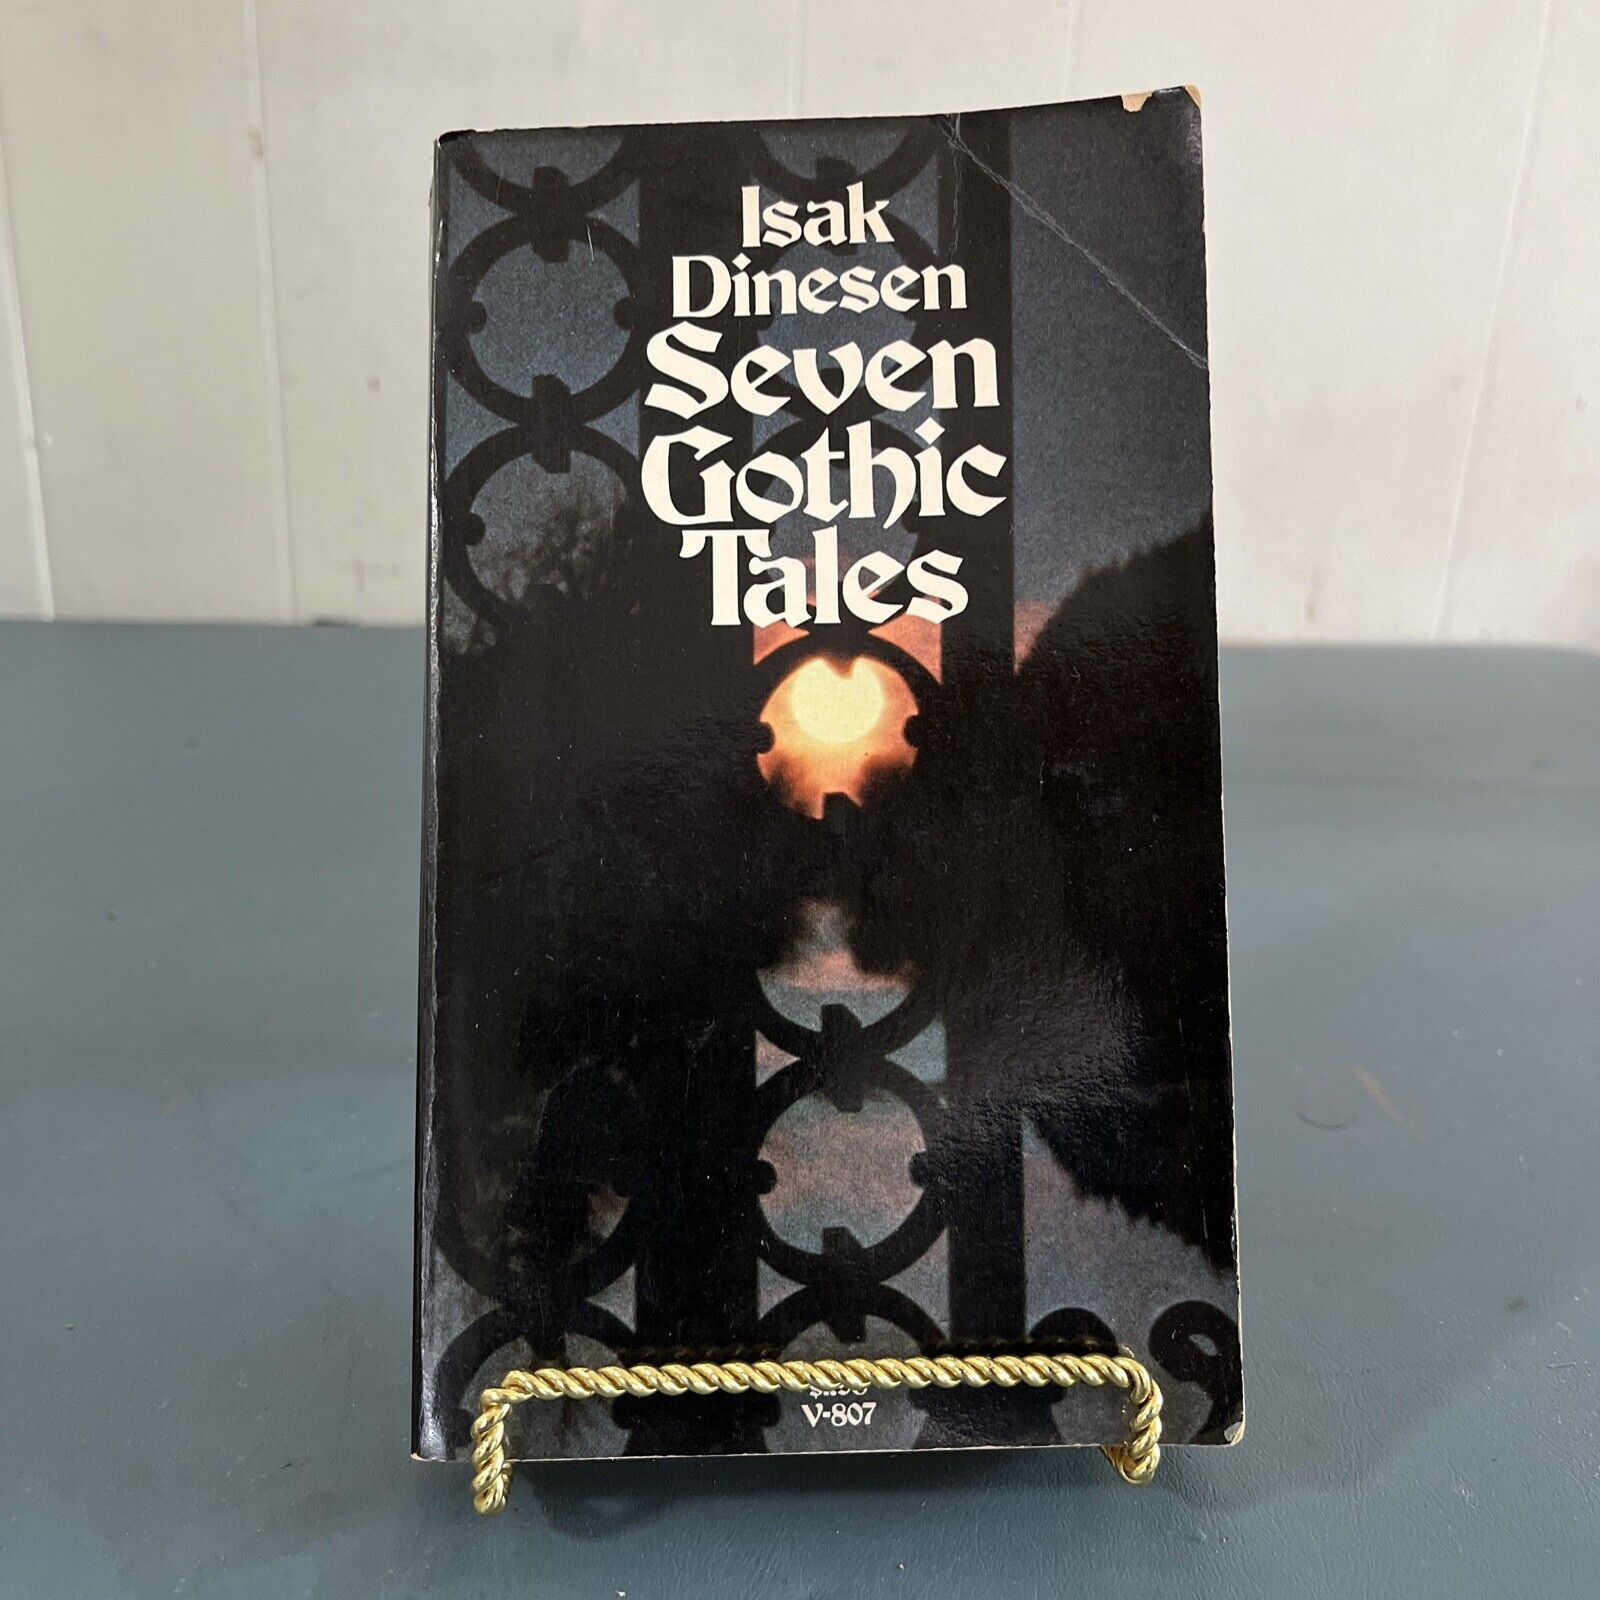 Seven Gothic Tales Horror Paperback Book by Isak Dinesen from Vintage Books 1972